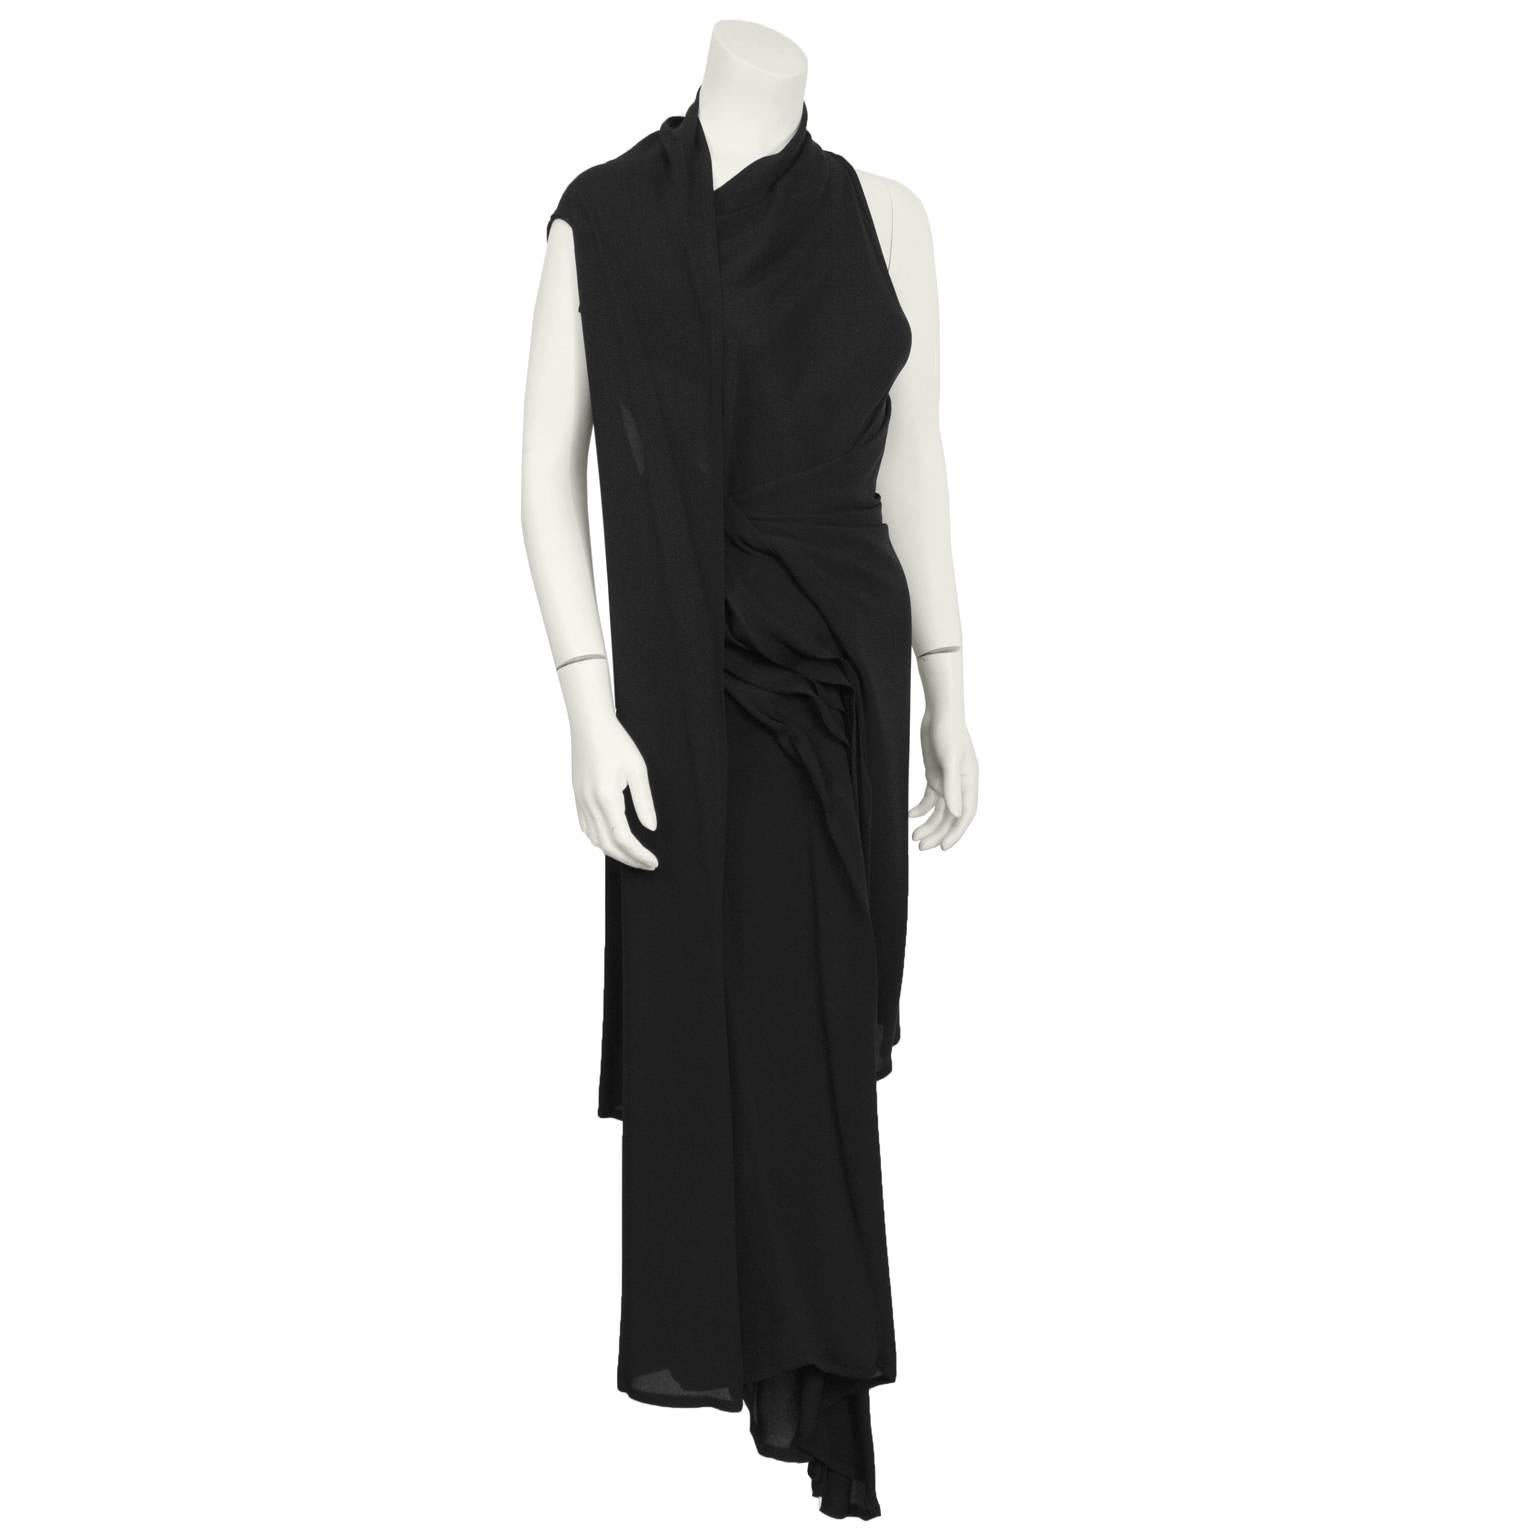 1990's Anne Demeulemeester black crepe convertible draped cocktail dress. Fastens with a single snap button at the neck. Sleeveless design with an asymmetric neckline, a tie waist and asymmetric draped fabric. Excellent condition.  Forgiving fit